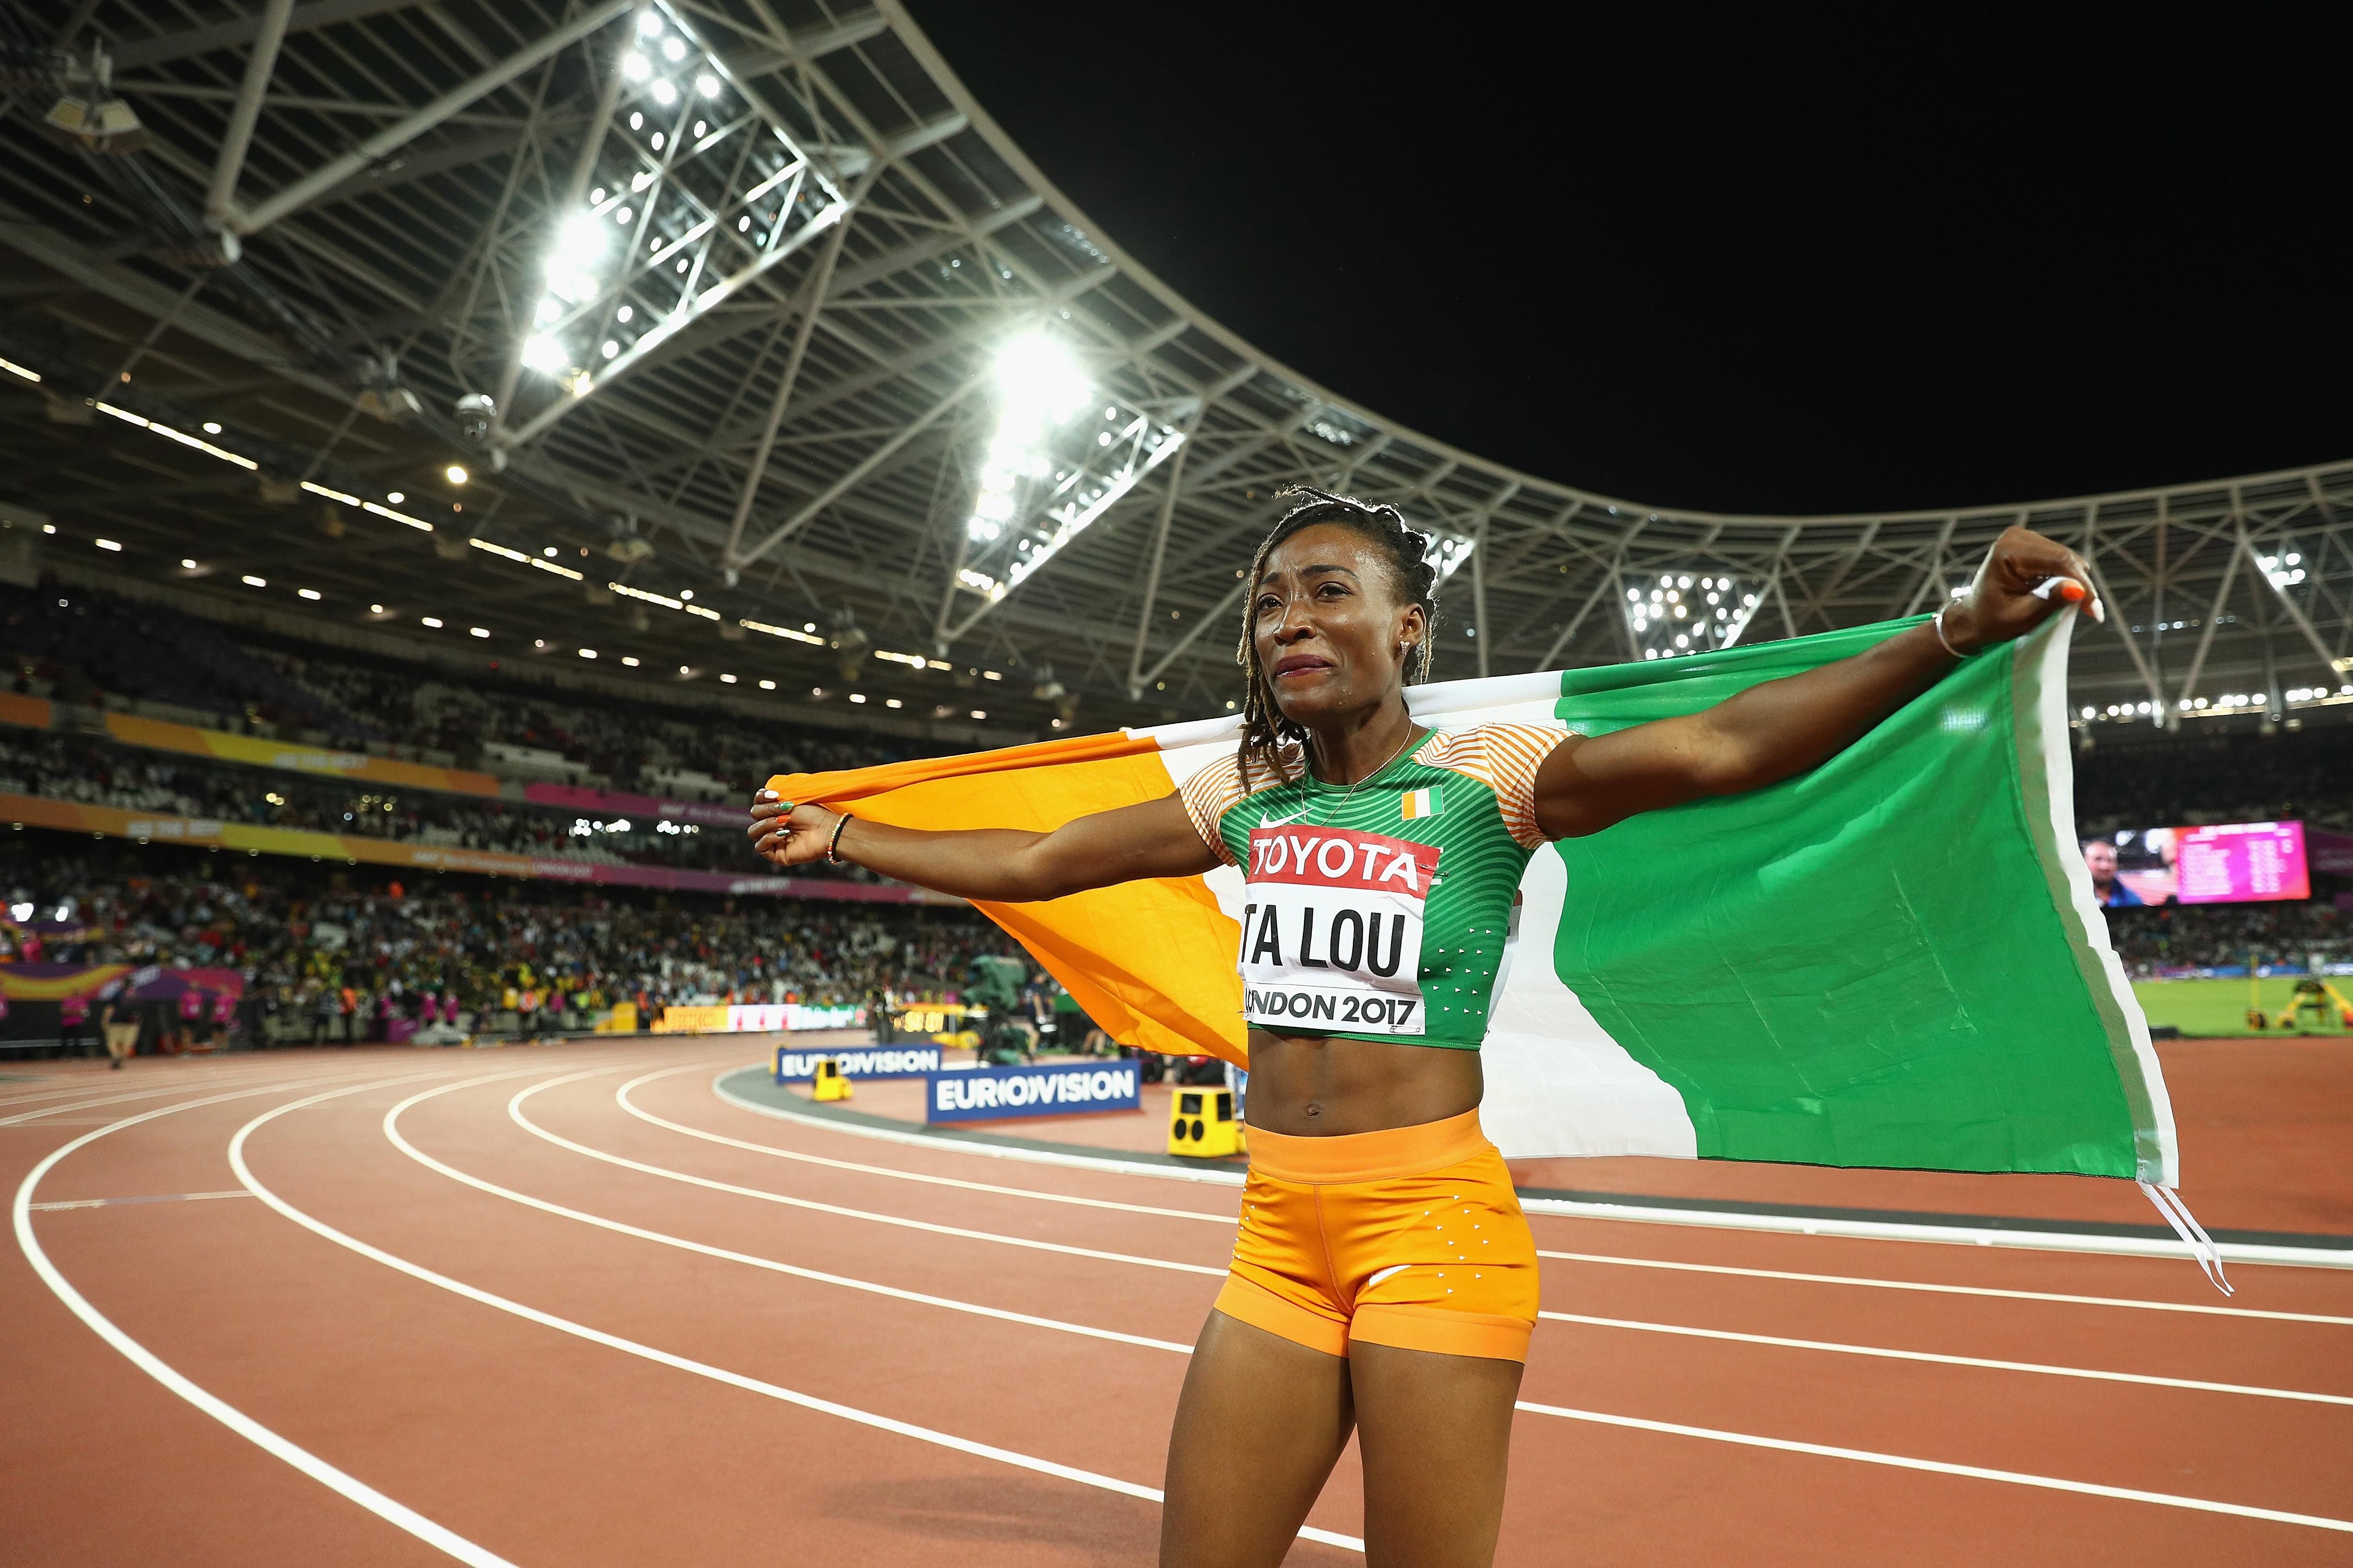 Marie-Josee Ta Lou of Ivory Coast after taking the silver medal over 100m at the IAAF World Championships London 2017